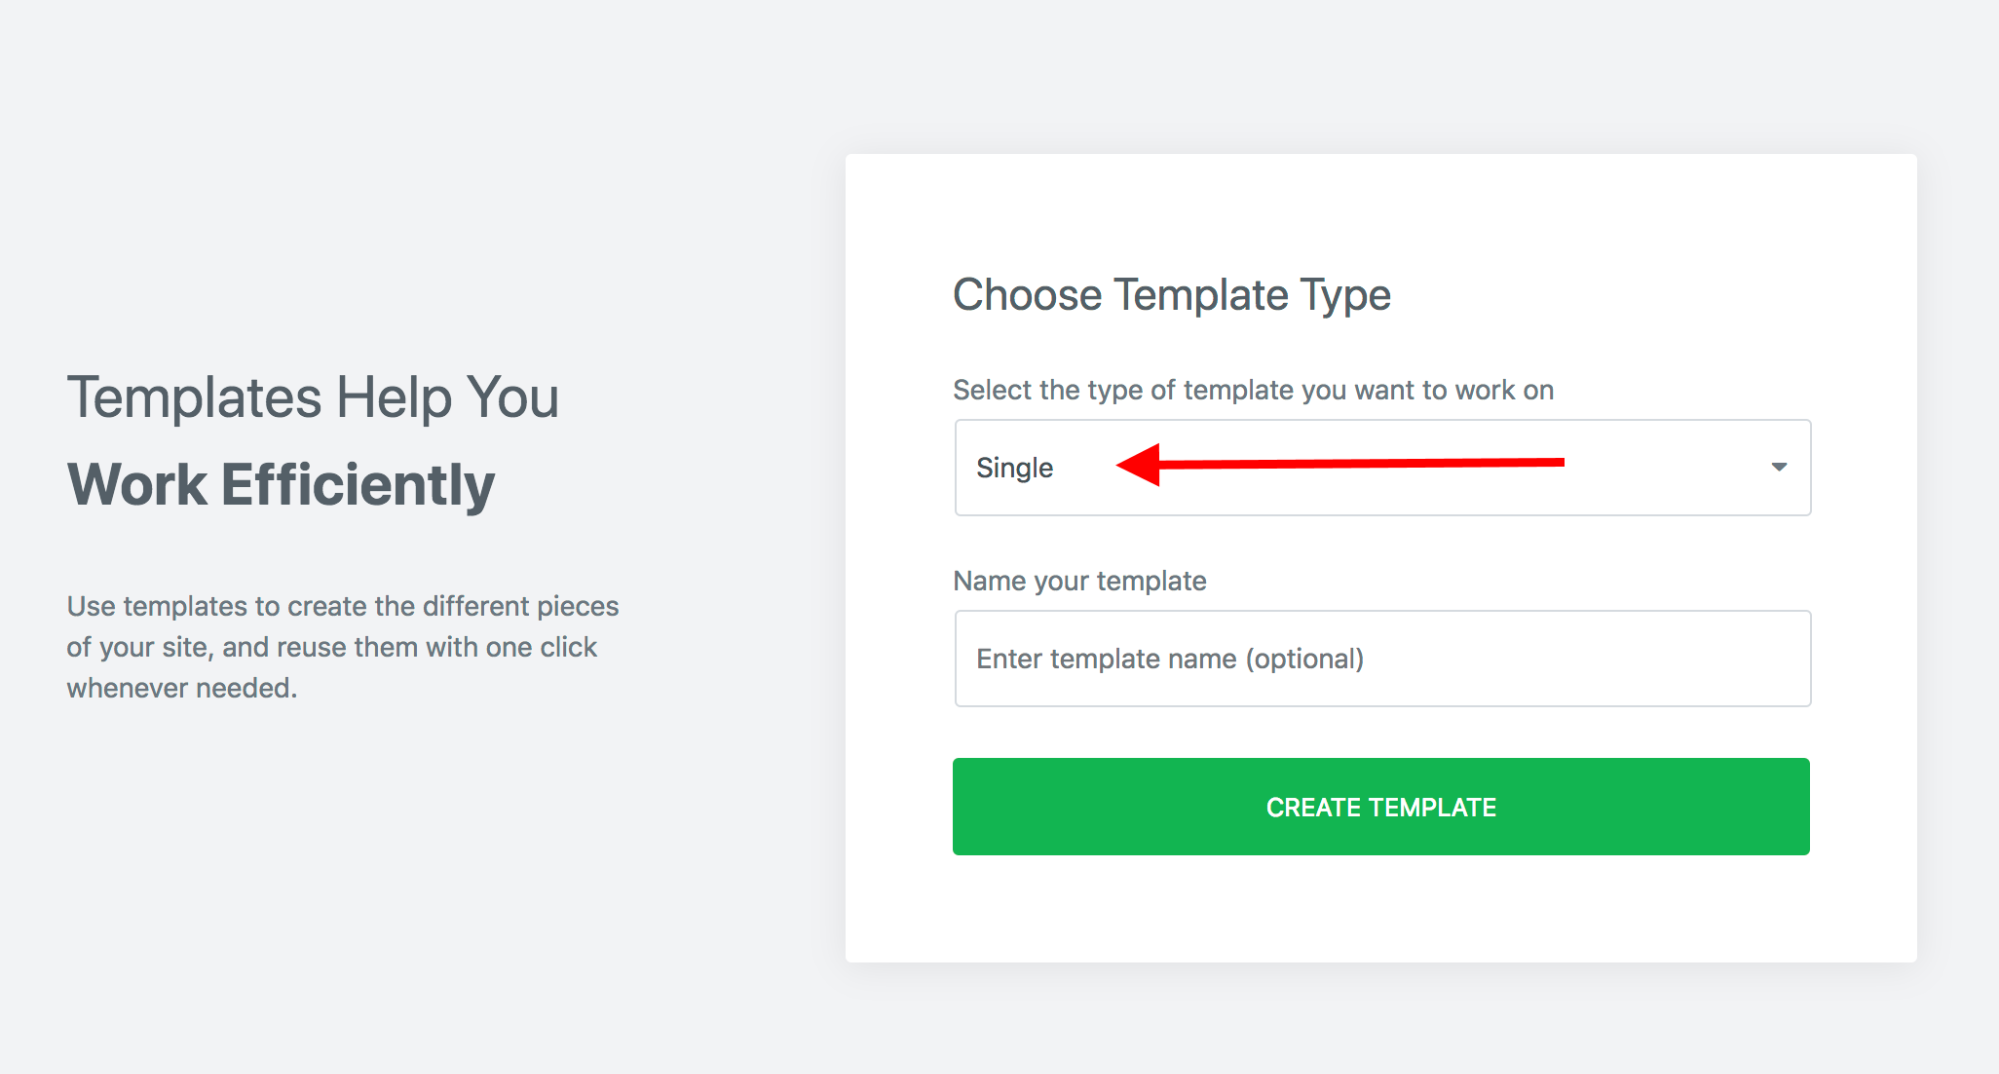 Image5 How To Create A Wordpress Single-Post Template In Elementor 4